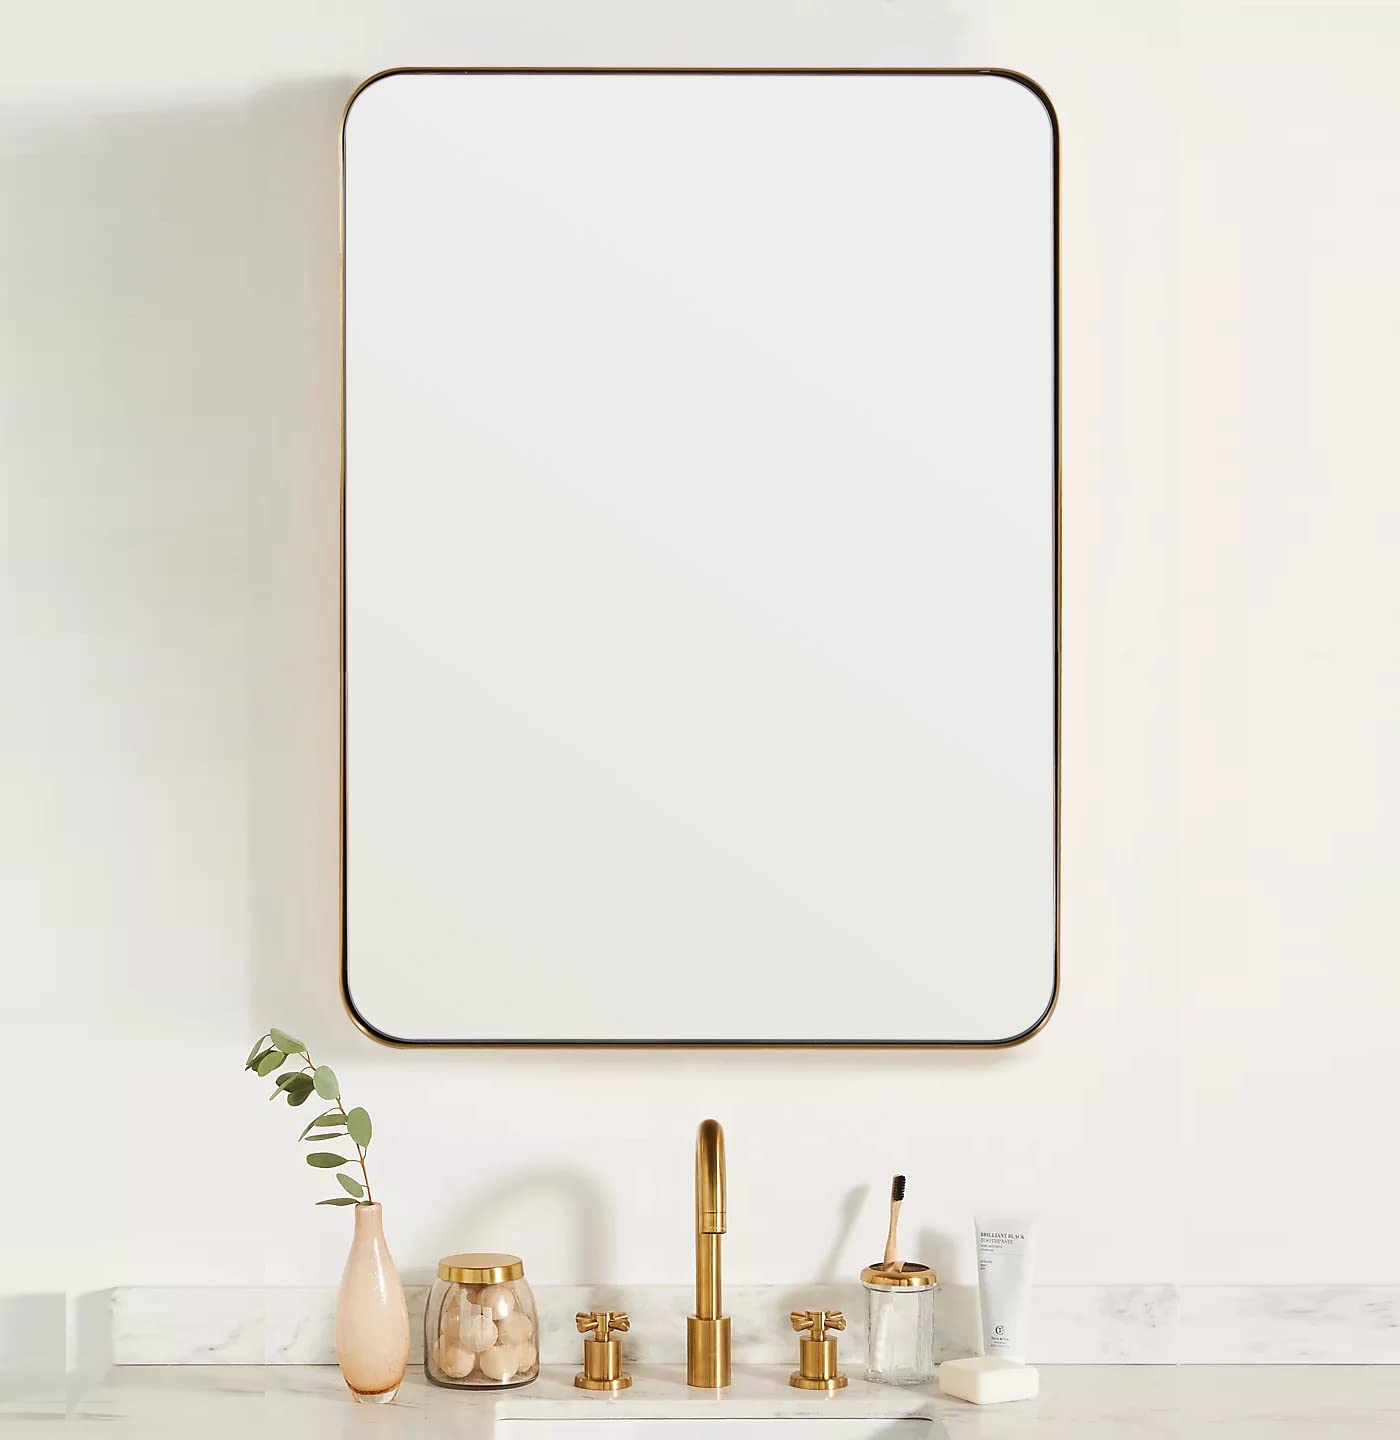 ANDY STAR Gold Bathroom Mirror,22x30'' Brushed Brass Metal Frame Rounded Corner Wall Mirror,Rectangle Wall Mounted Mirror Glass Panel Hangs...